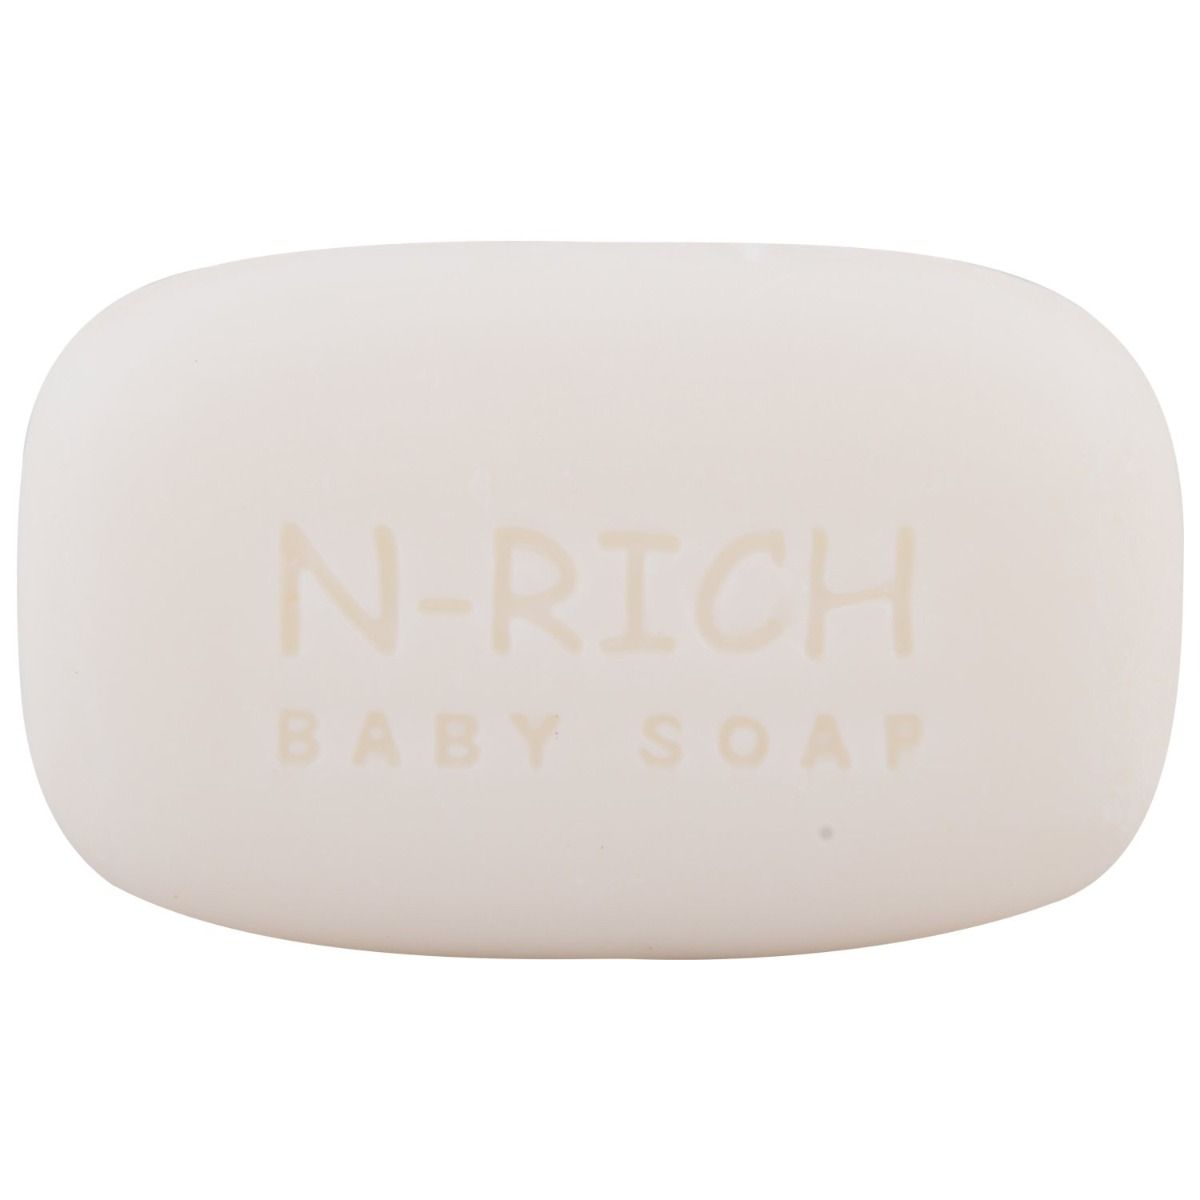 N-Rich Soap, 75 gm, Pack of 1 